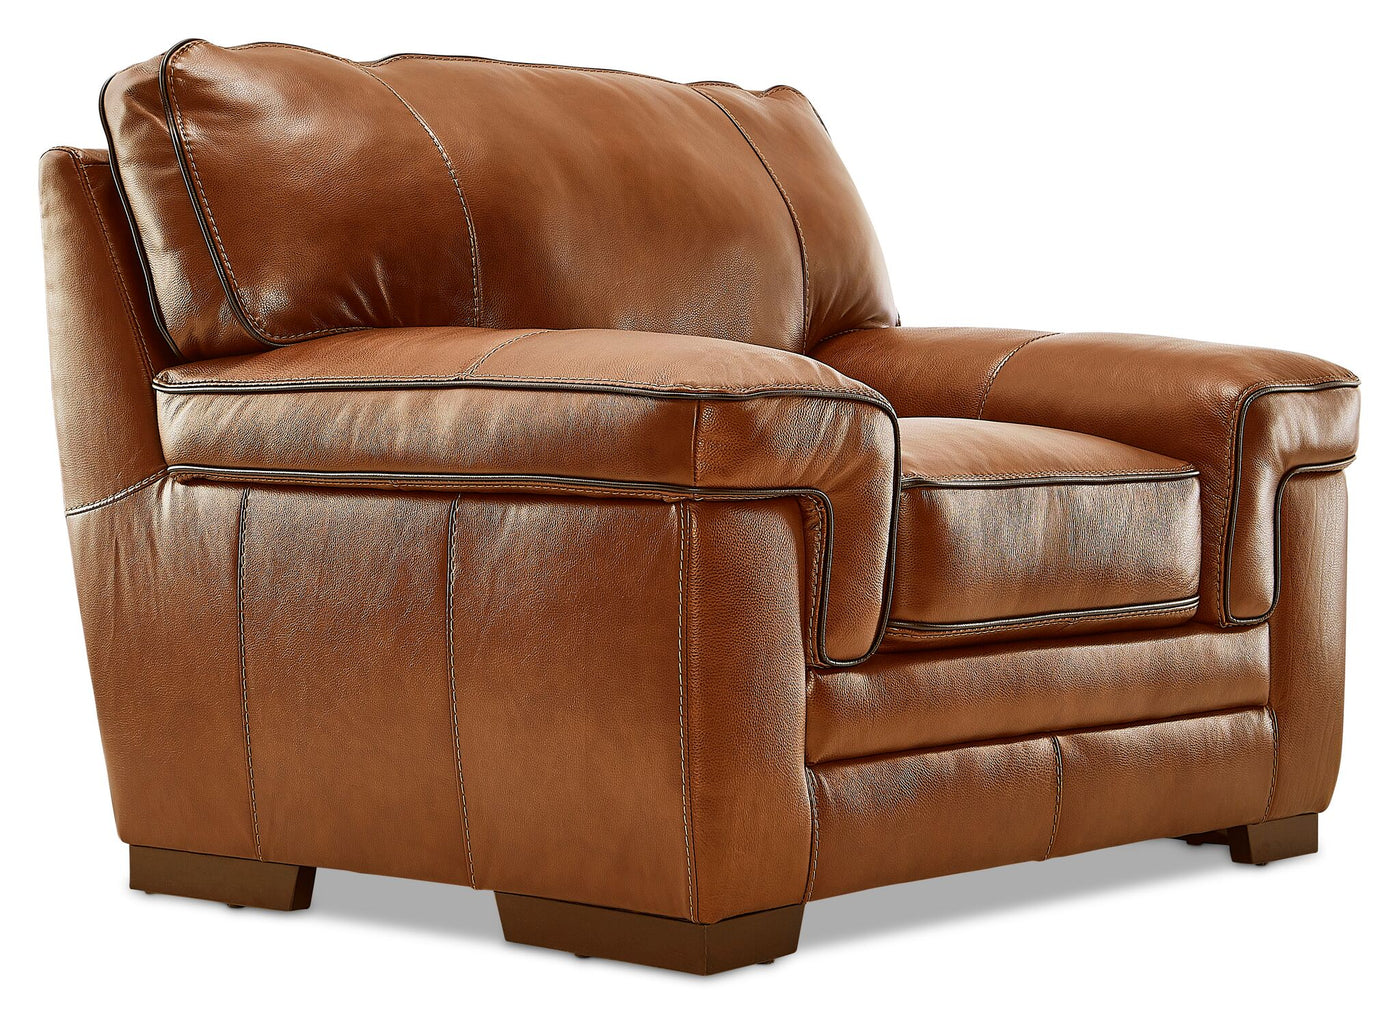 Stampede Leather Chair - Chestnut